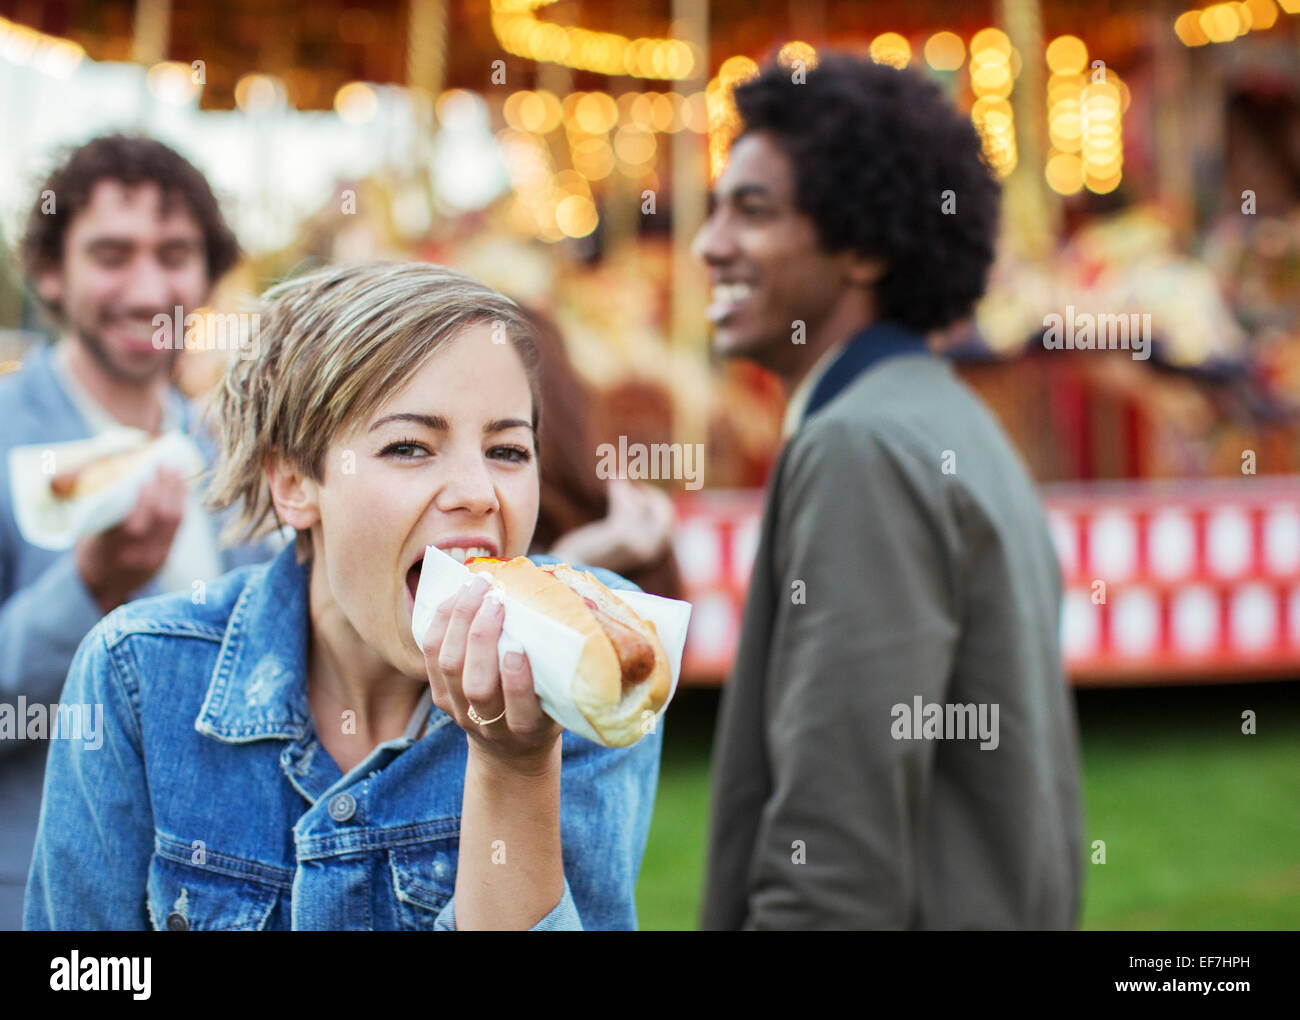 Three young people eating hot-dogs in amusement park Stock Photo